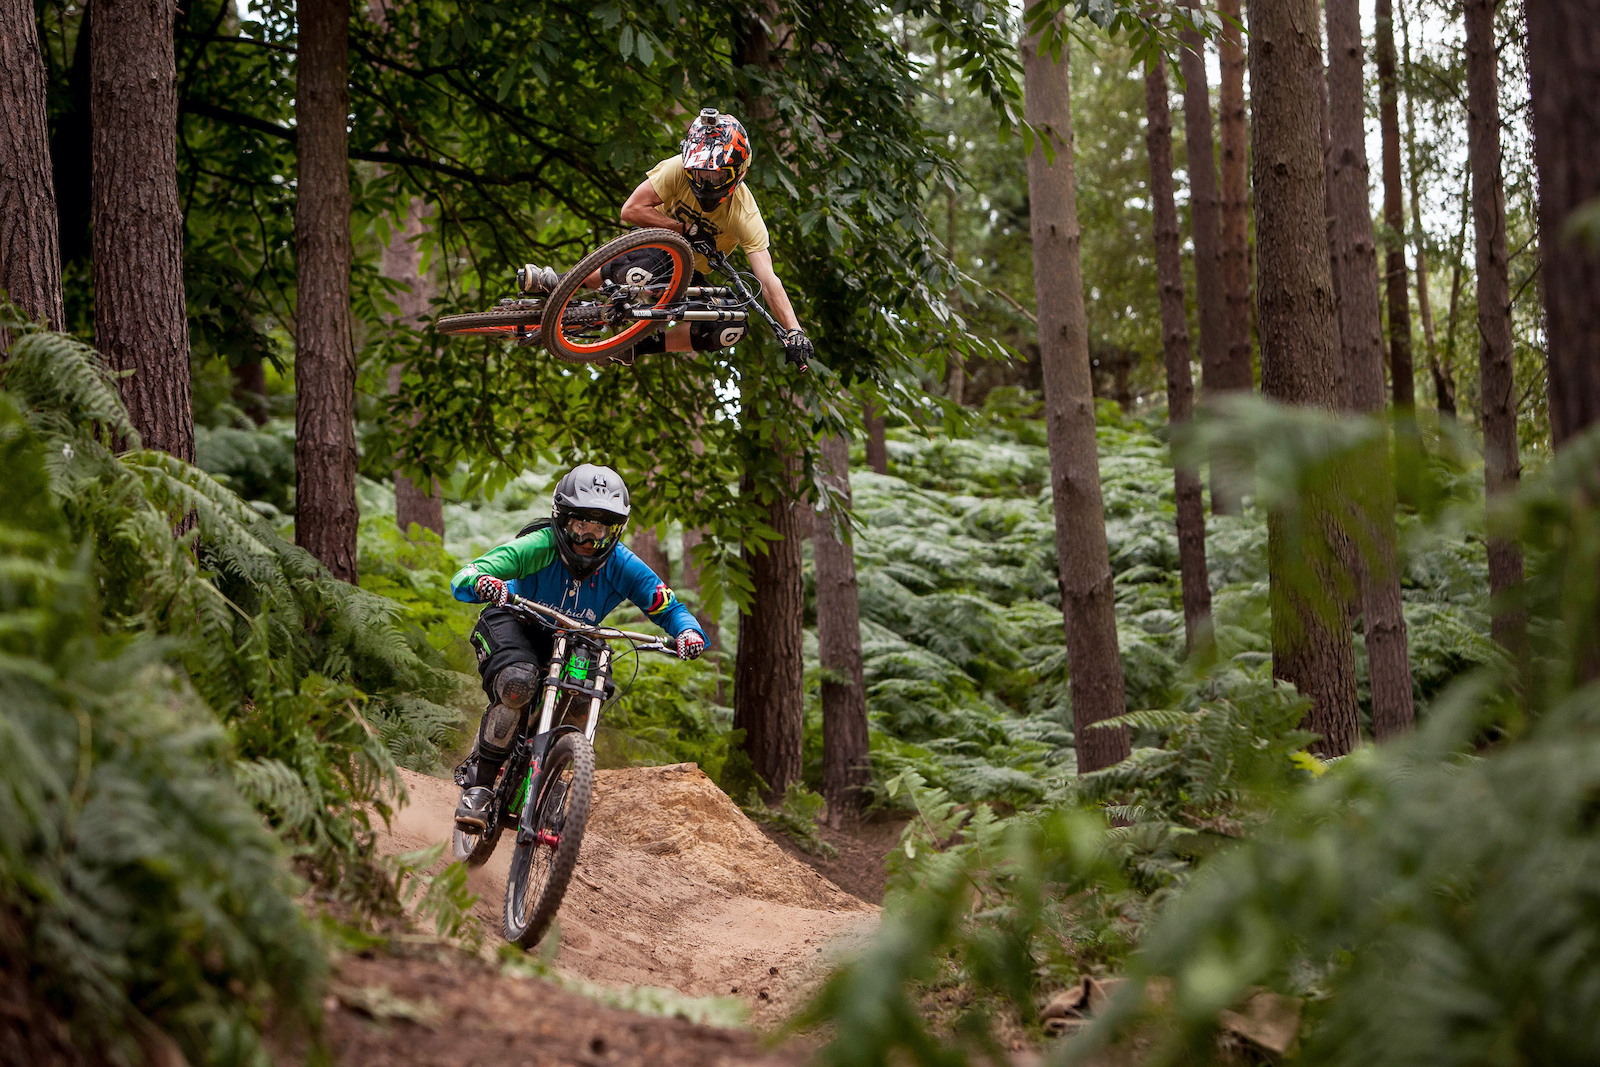 Sending it at Woburn Bike Park with the Missus, Suzanne Lacey - photo thanks to Gepard79!